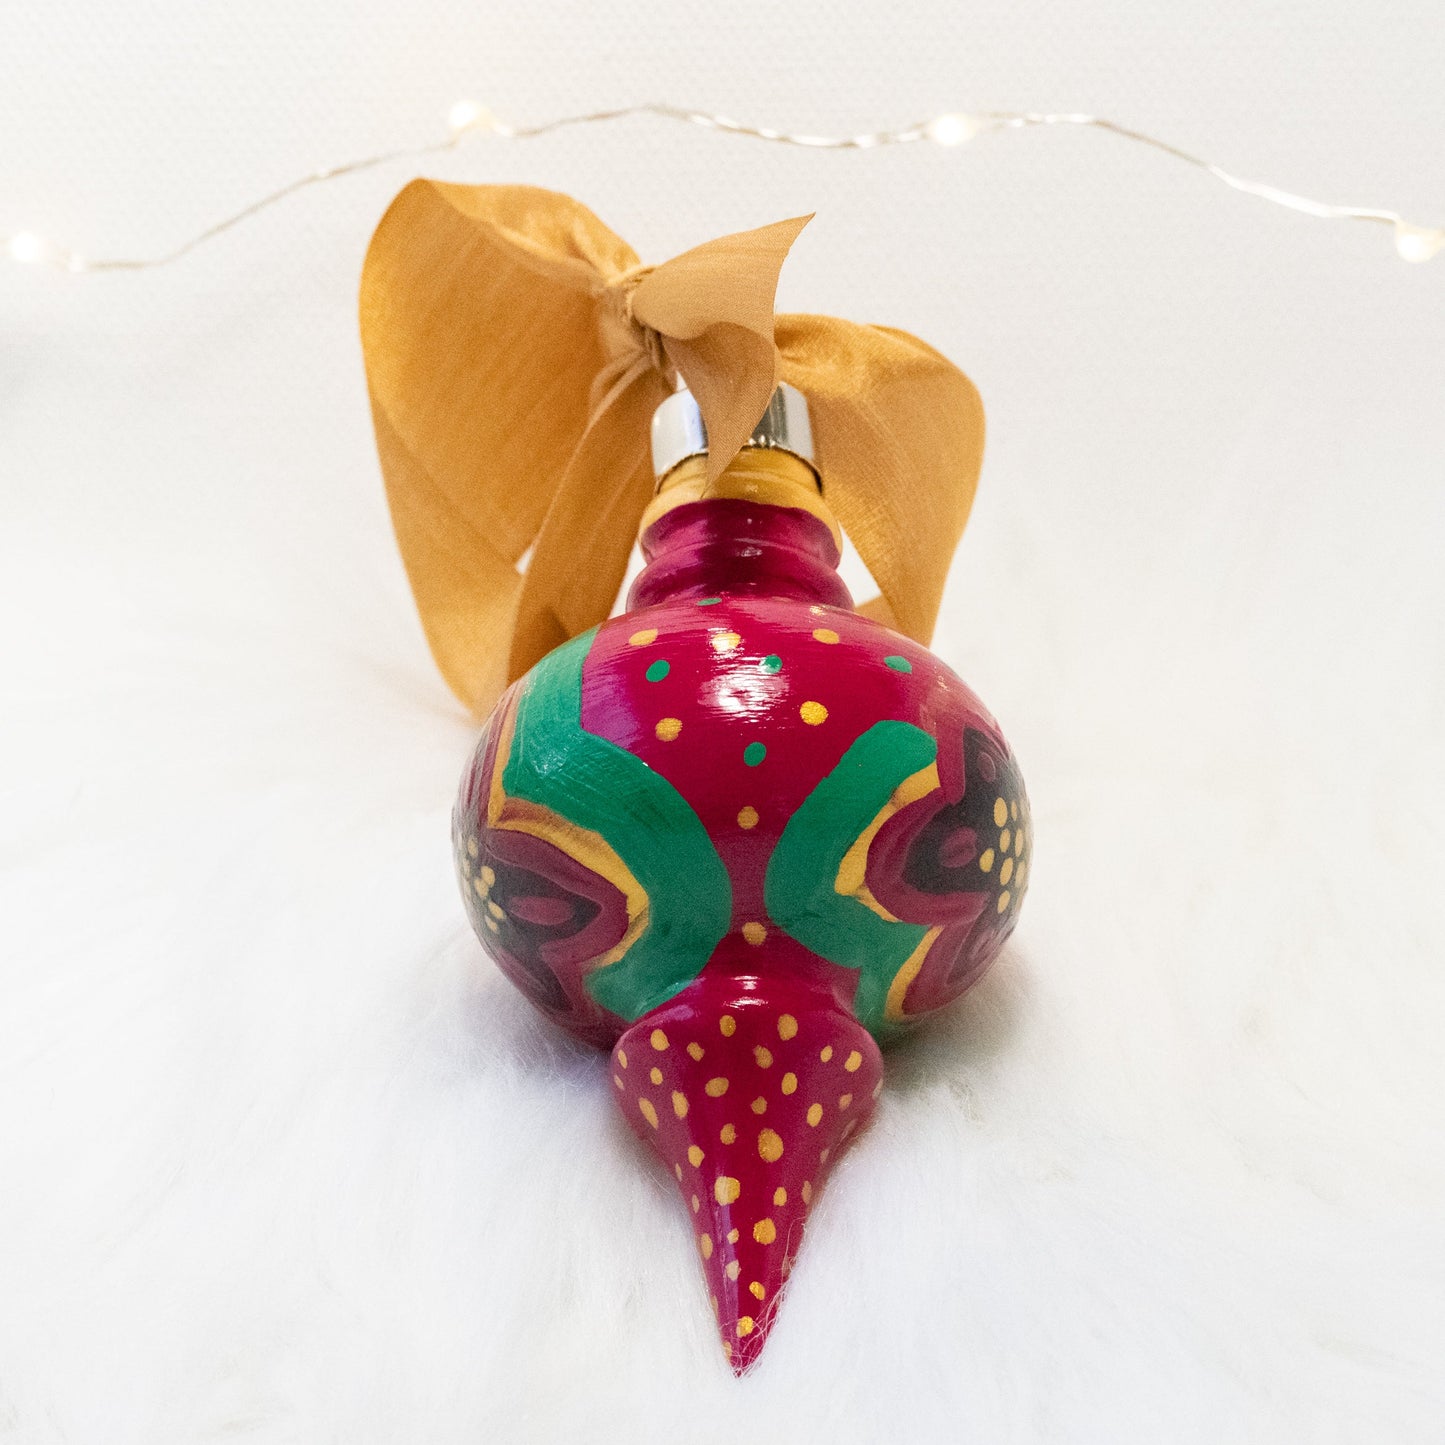 The Lois Hand Painted Ornament features a rose violet base coat, black flowers with gold and green polka dots and accents. Painted using fluid acrylic and acryla gouache paints. Displayed on white faux fur with fairy lights in the background.